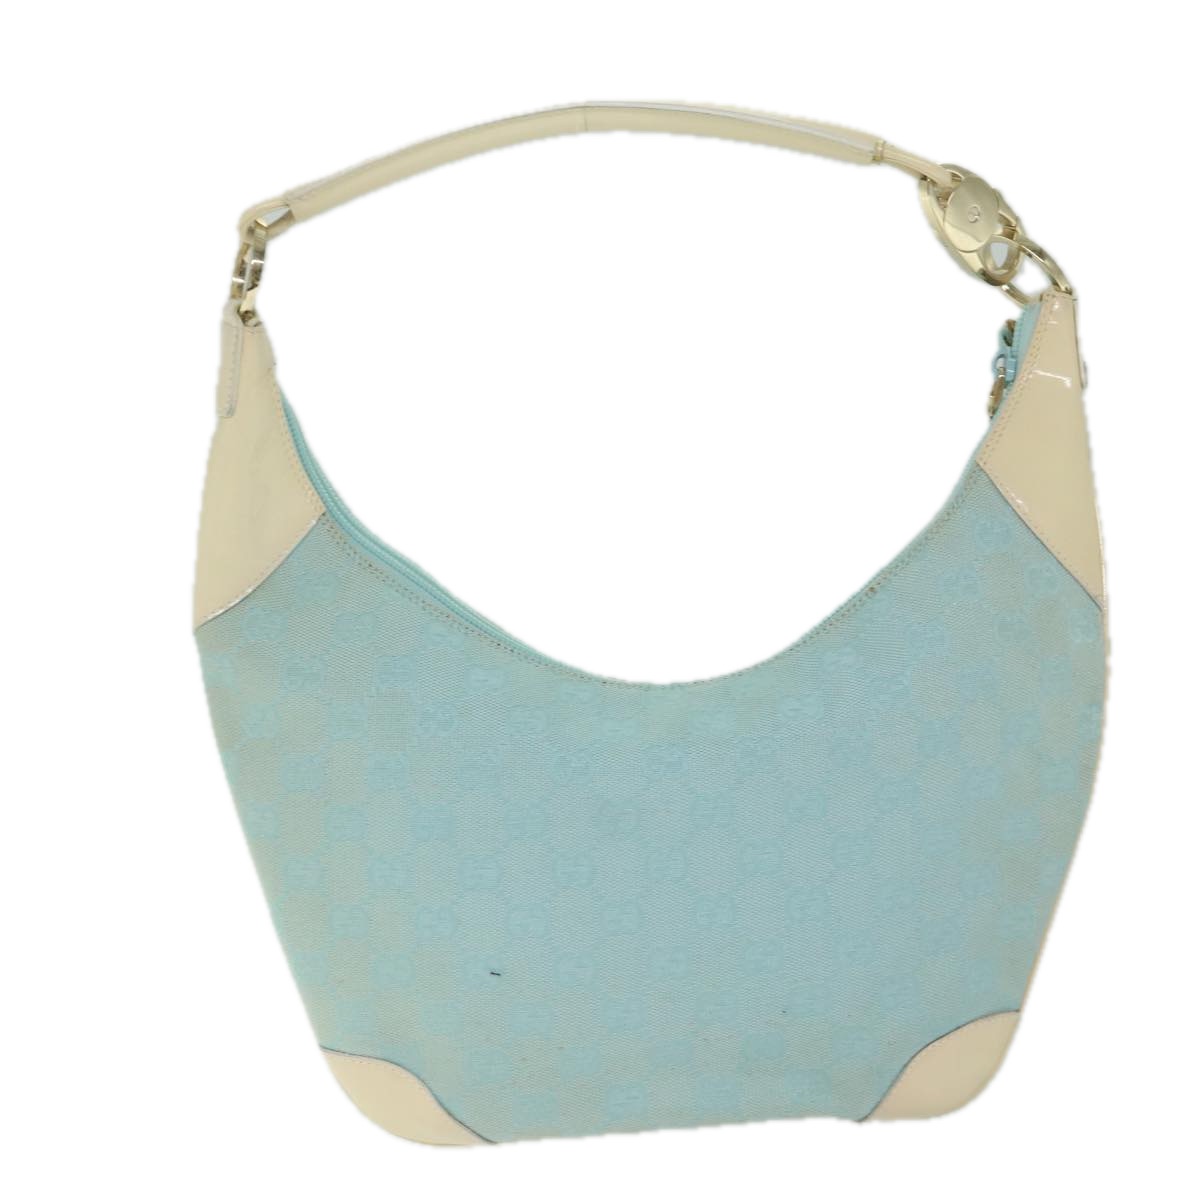 Blue Canvas Shoulder Bag with Metal Fittings